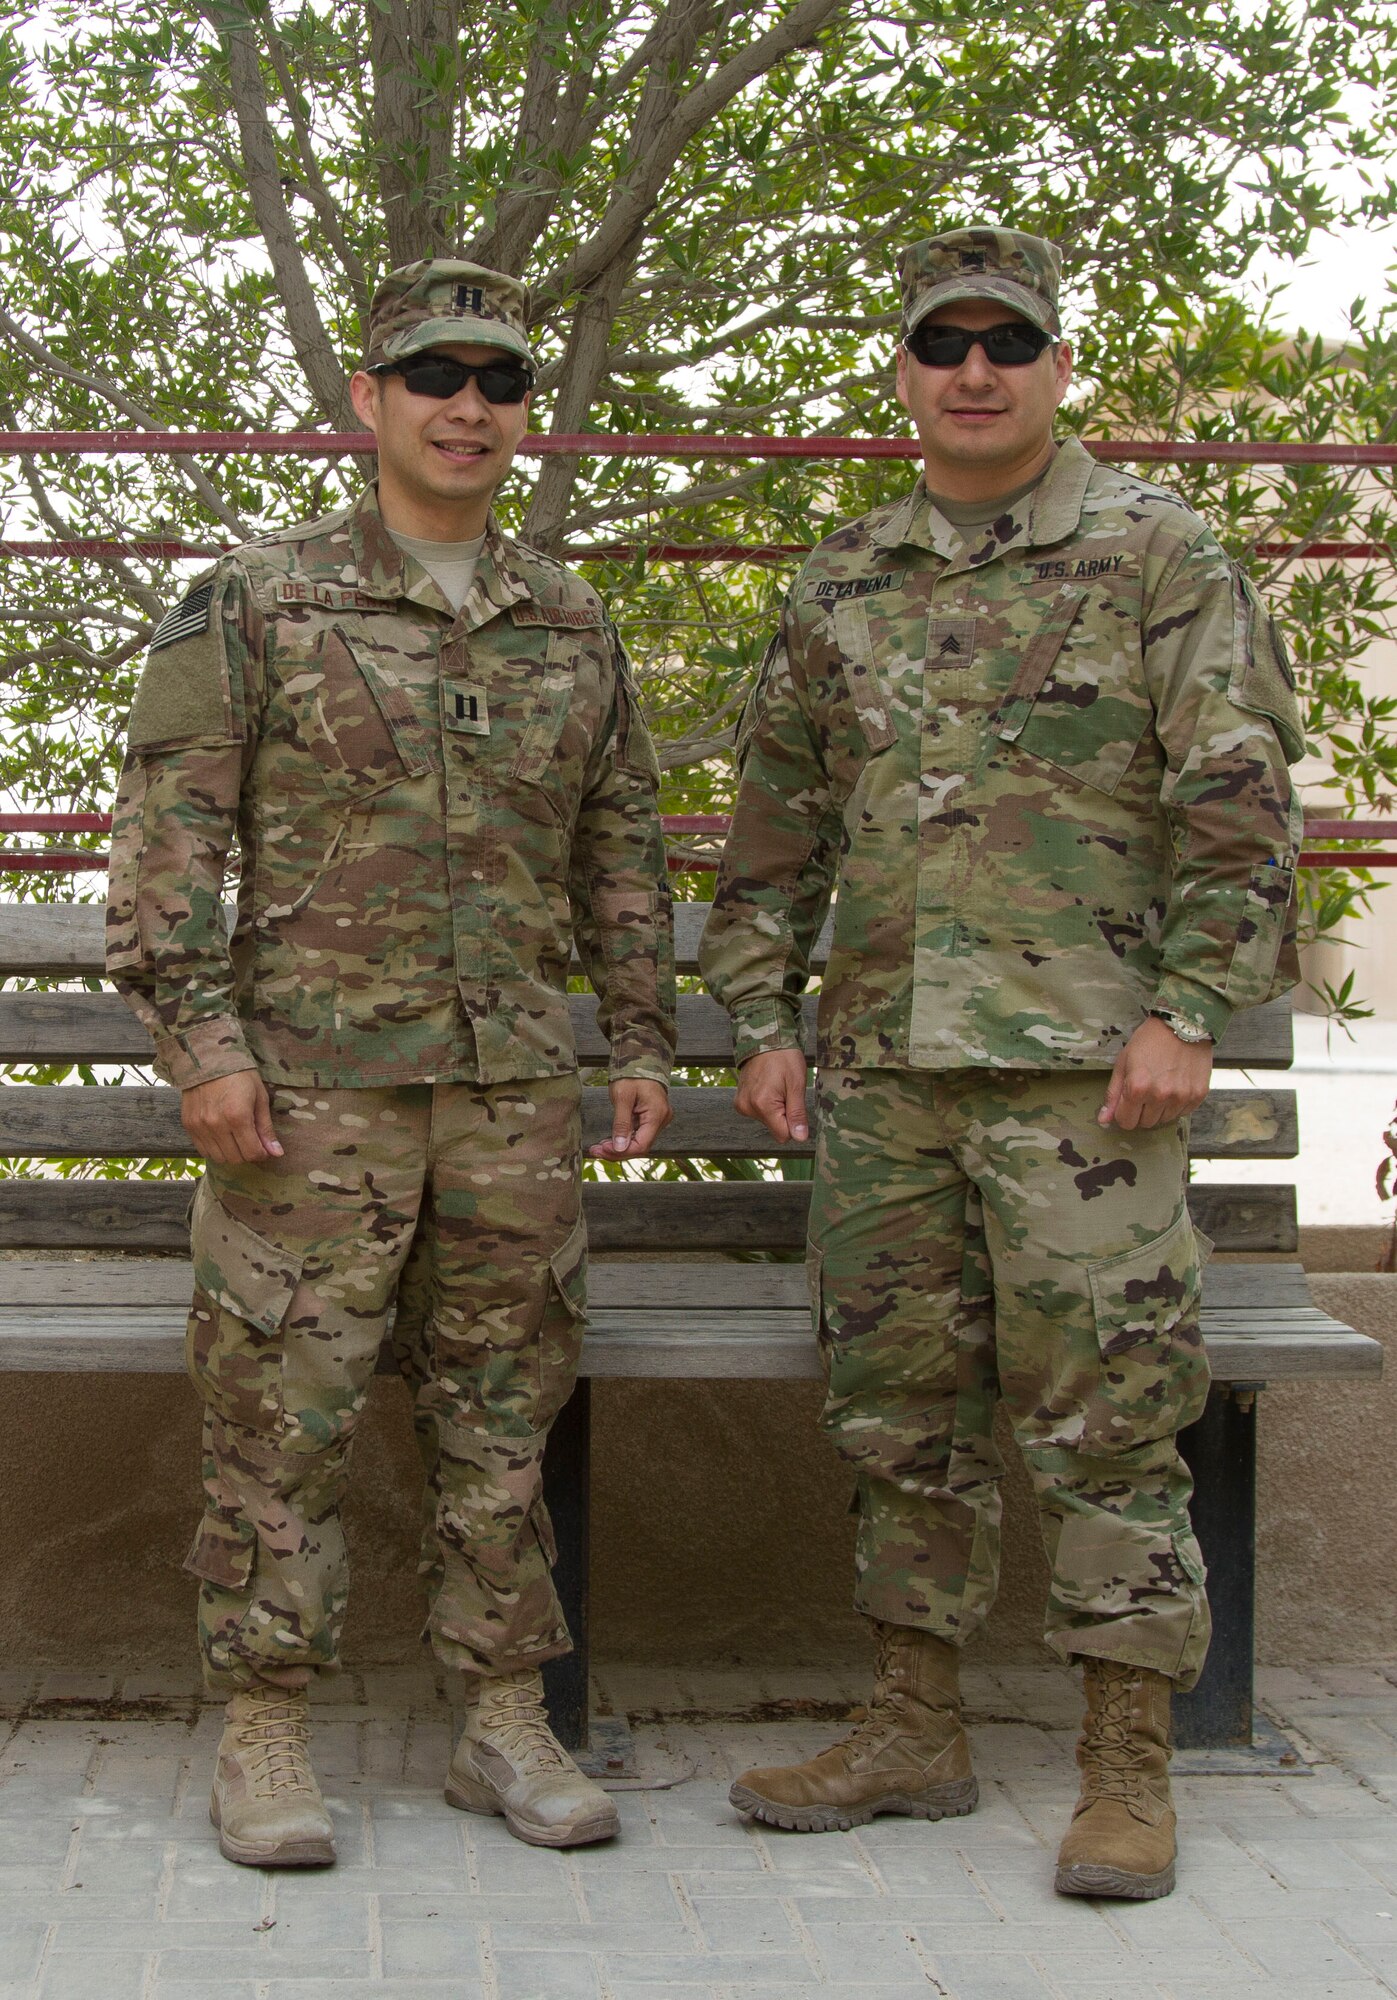 Cpt. Christopher De La Pena, Deputy Director AFCENT Lessons Learned Directorate, and Sgt. Nicholas De La Pena, Broadcast NCO AFCENT Public Affairs, pose together at Al Udeid Air Base, Qatar March 18. The brothers deployed together for the second time in 2016. (U.S. Army photo by Spc. Travis Terreo)